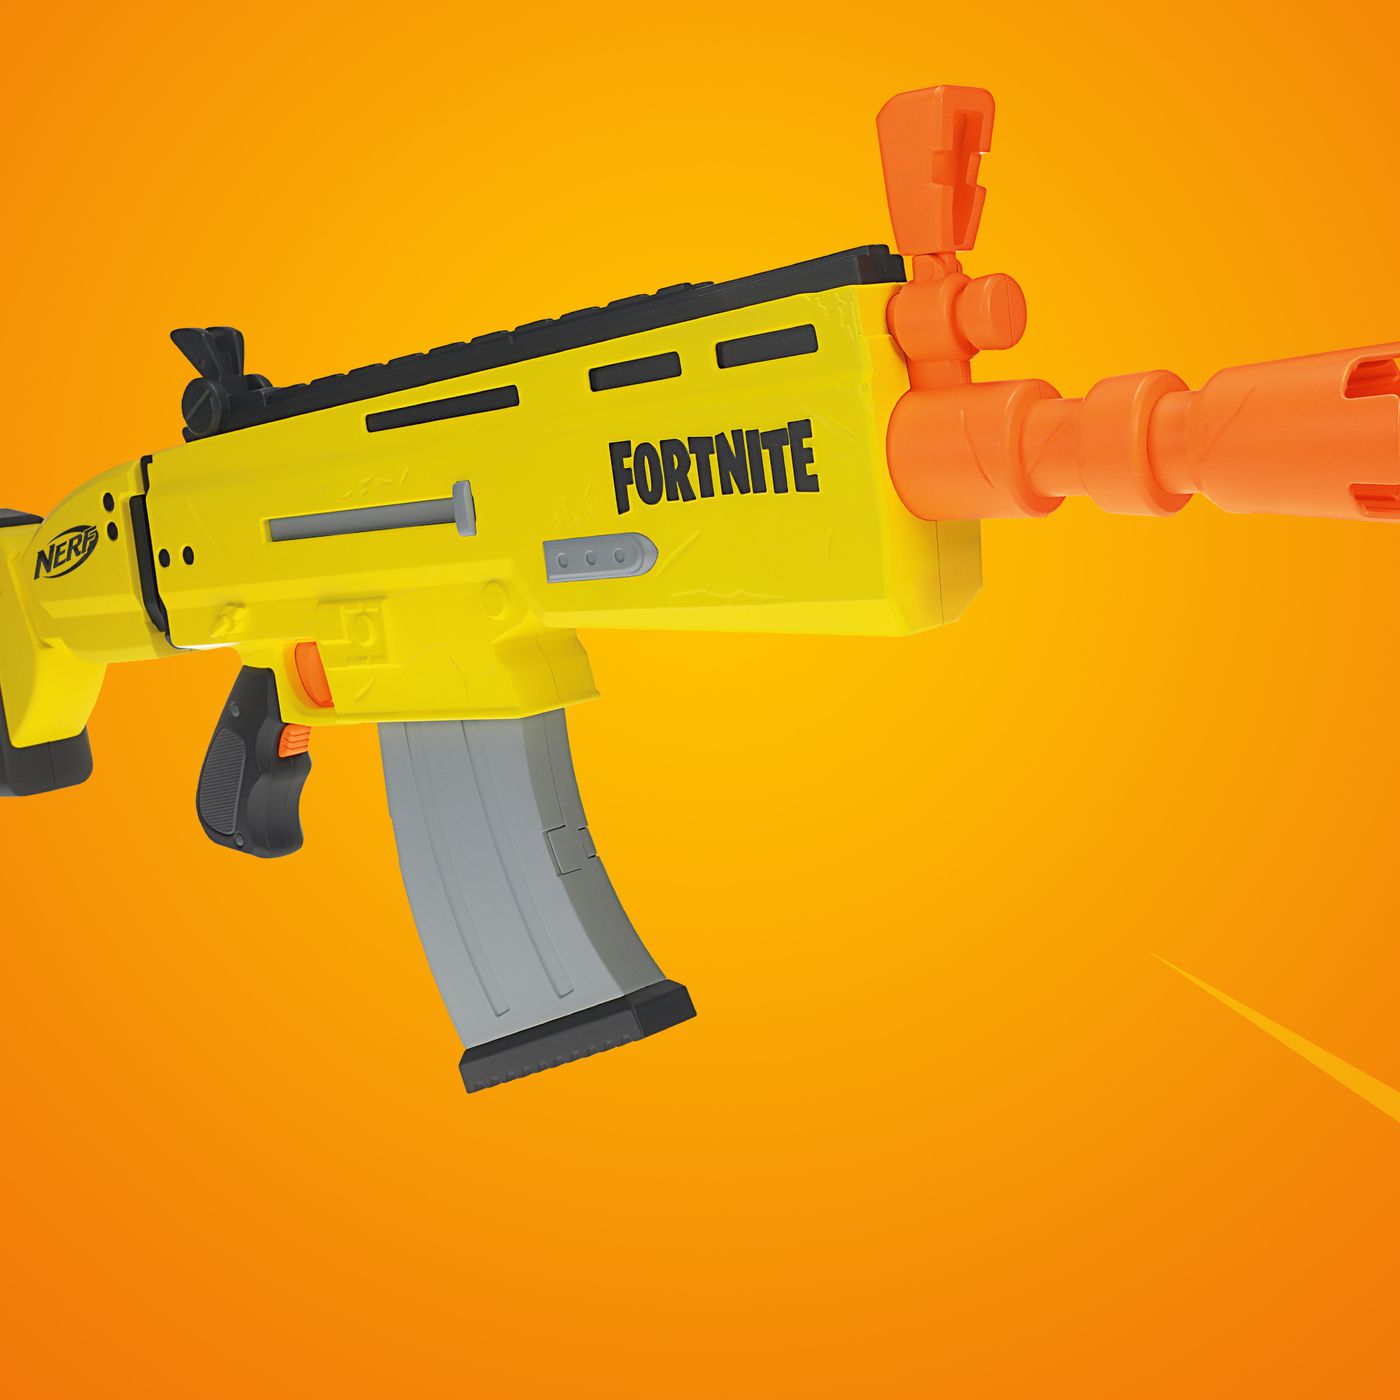 Fortnite's SCAR will make its Nerf debut next summer - Verge